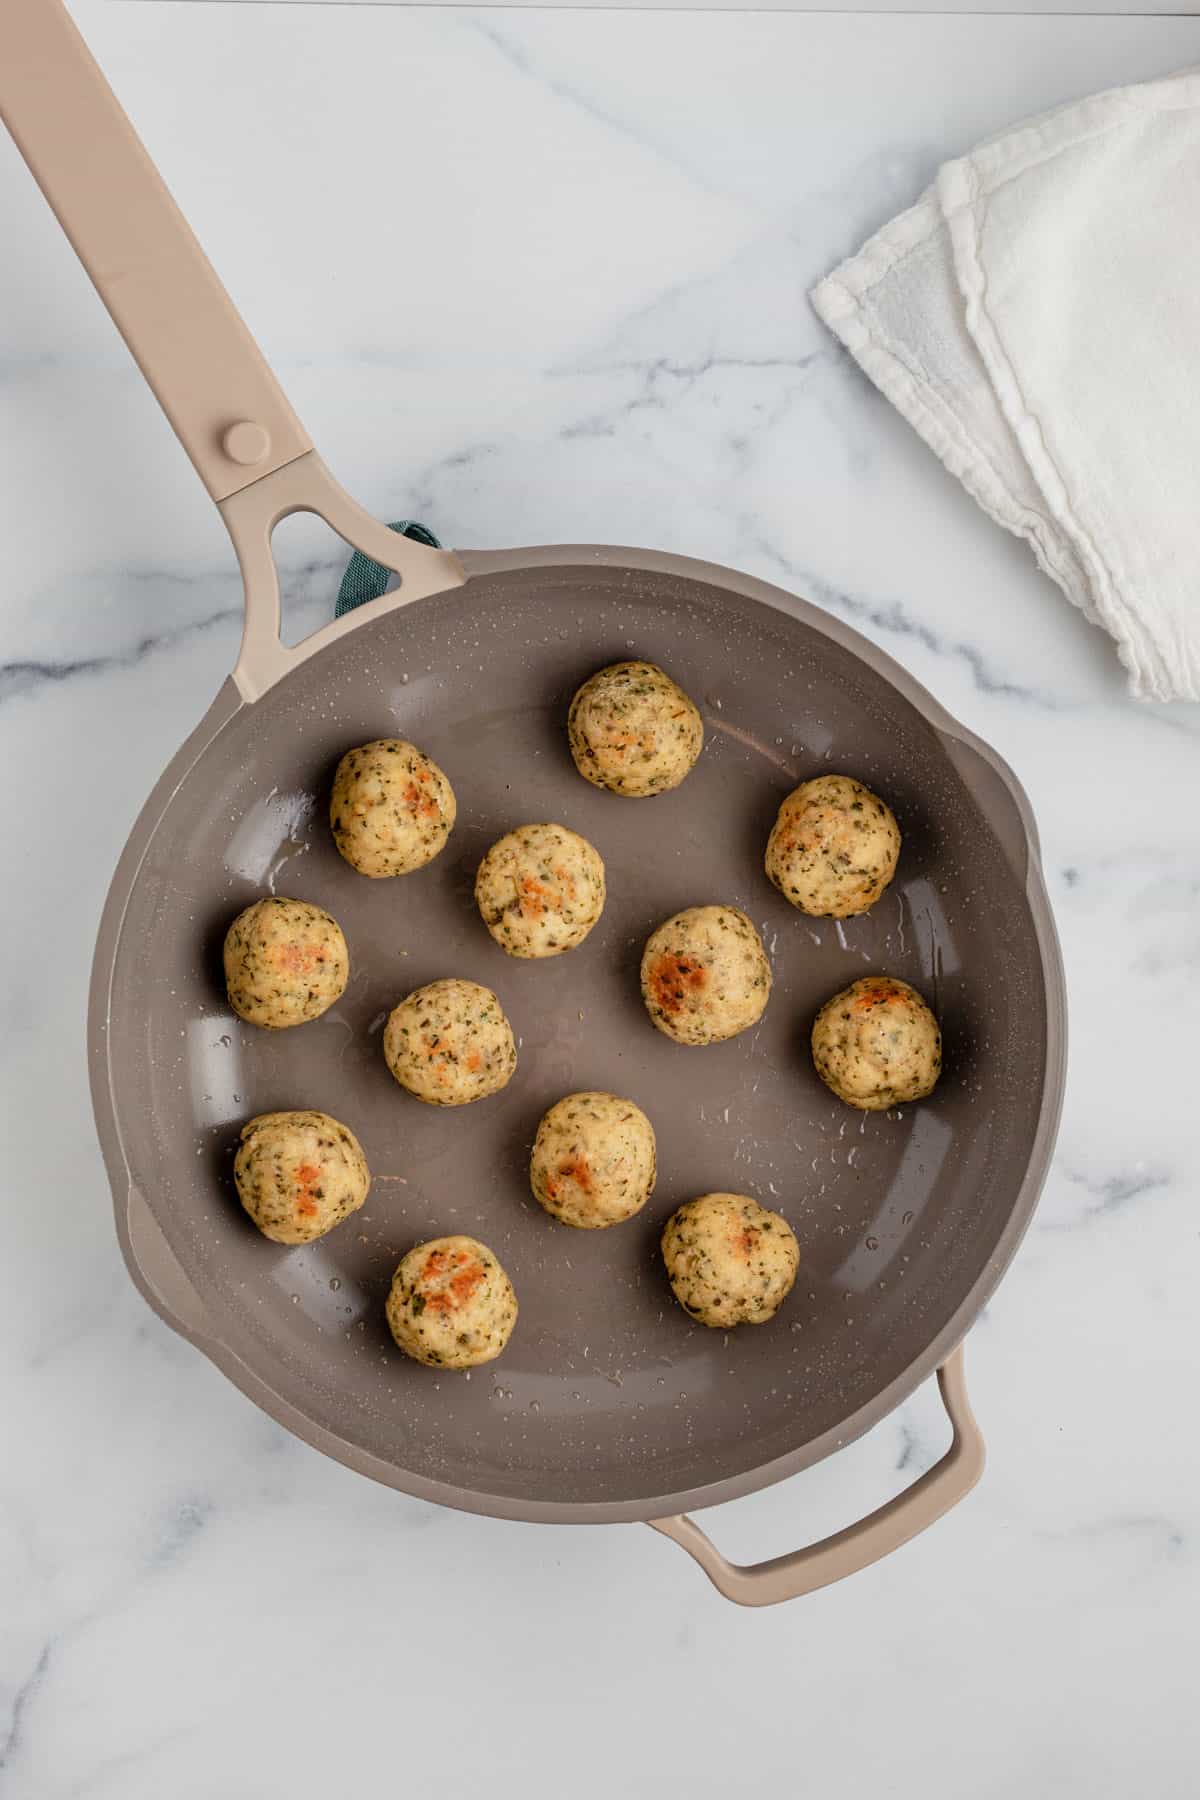 Cooked chicken meatballs in a skillet.